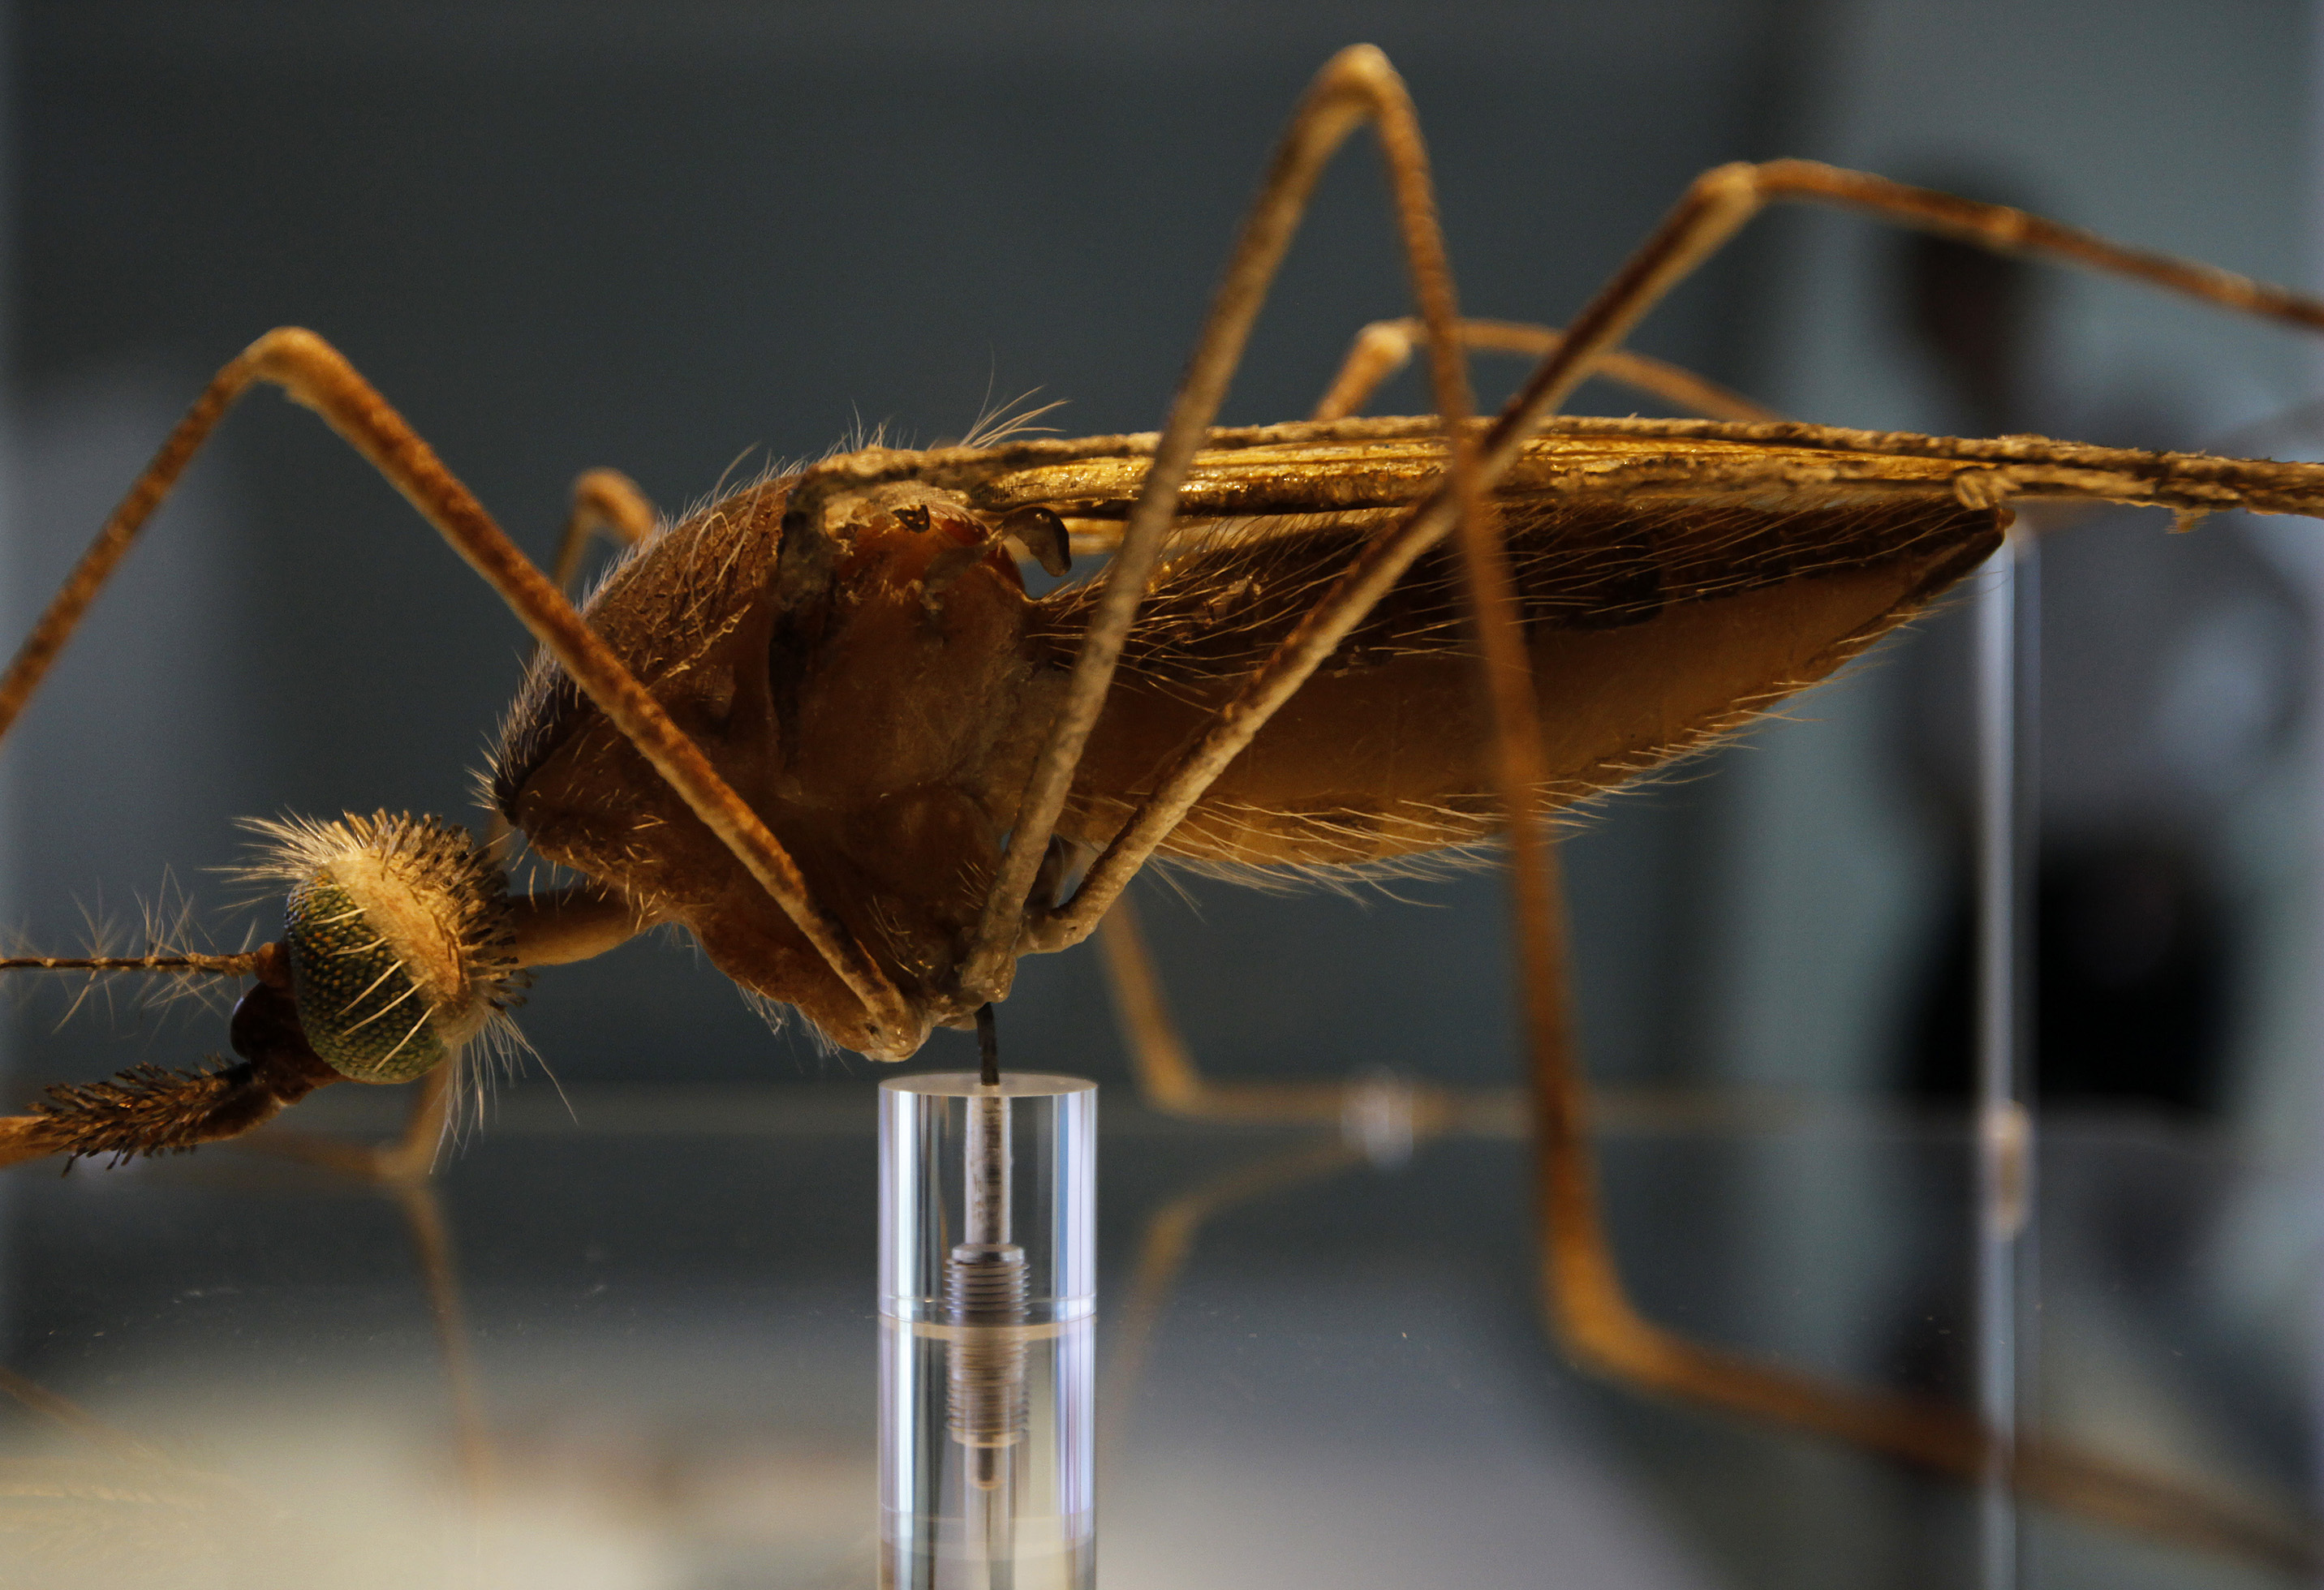 A man walks behind a model of an Anopheles mosquito in the new Darwin Centre at the Natural History Museum in London